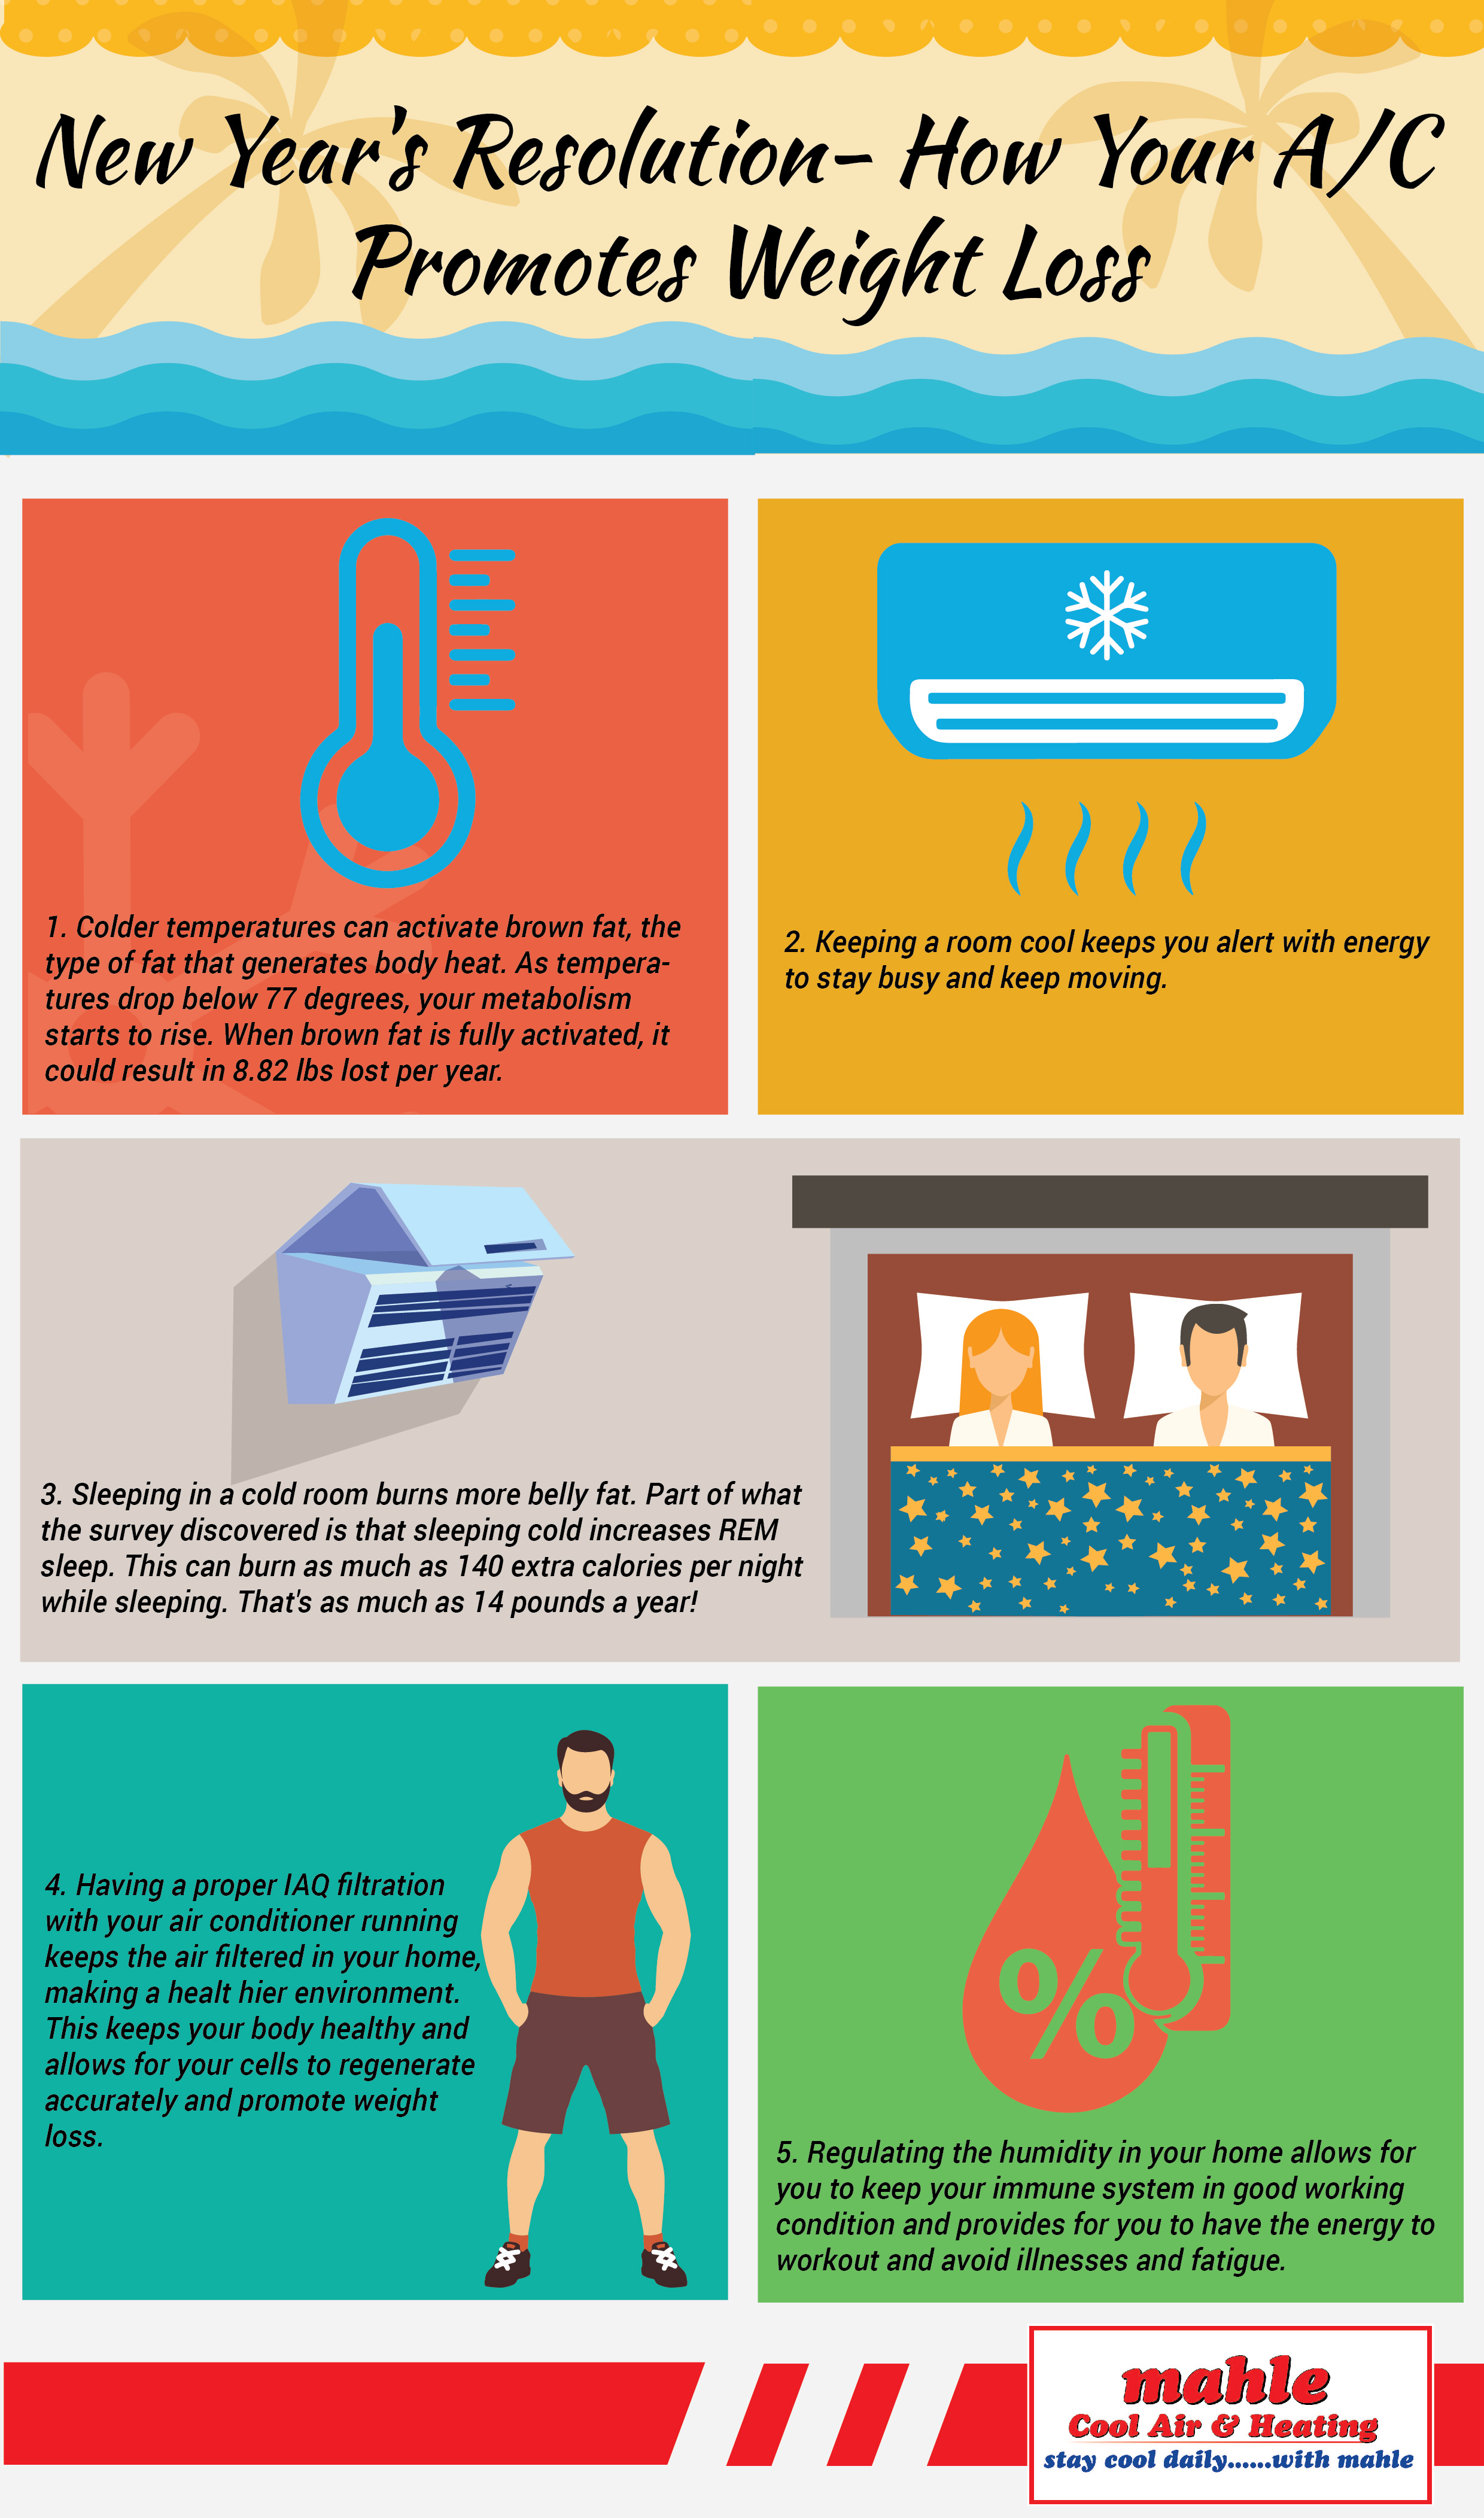 How Does Your Air Conditioner Effect Your Health